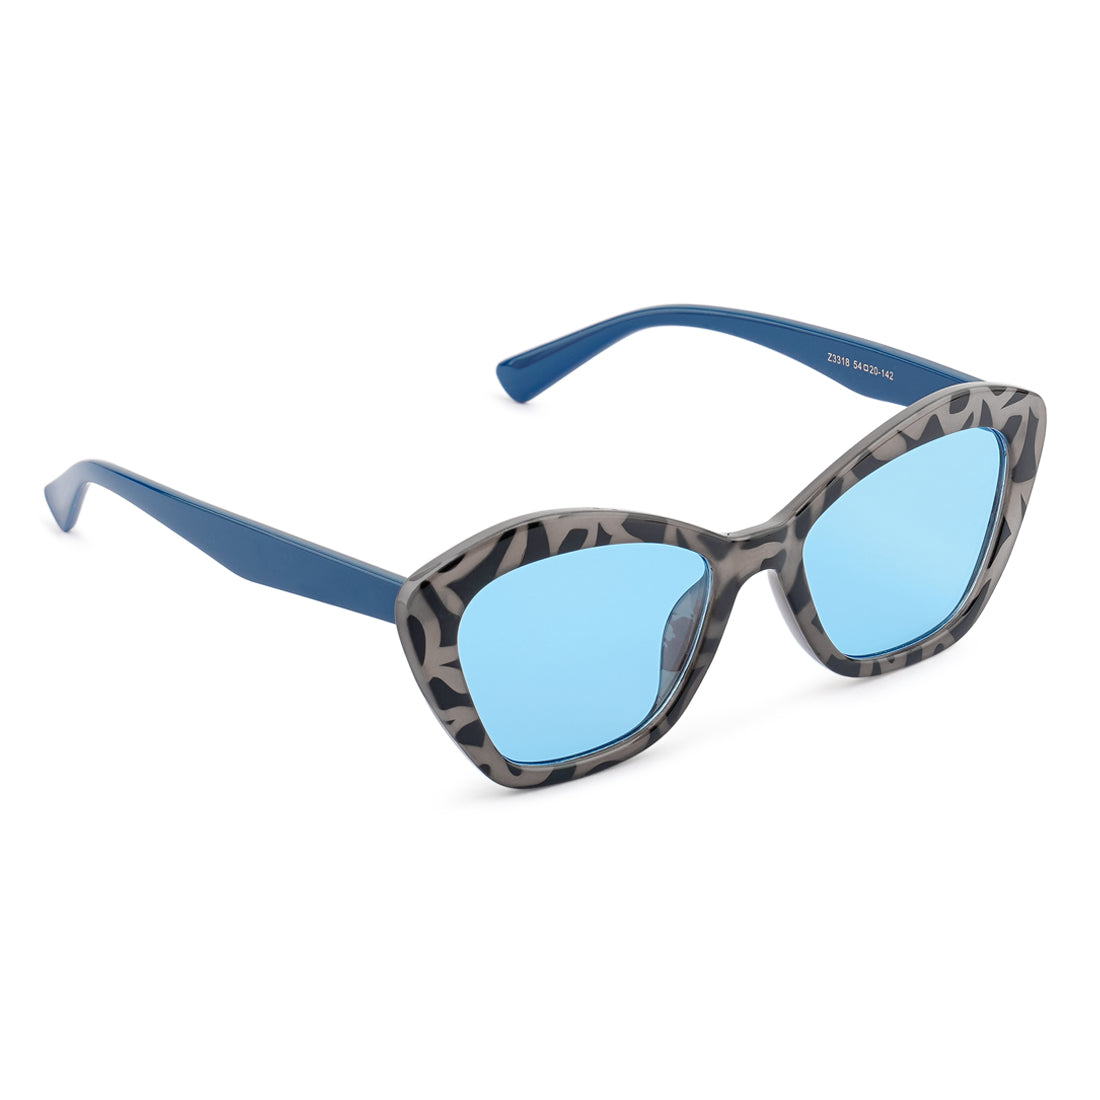 Printed Frame Butterfly Sunglasses In Blue